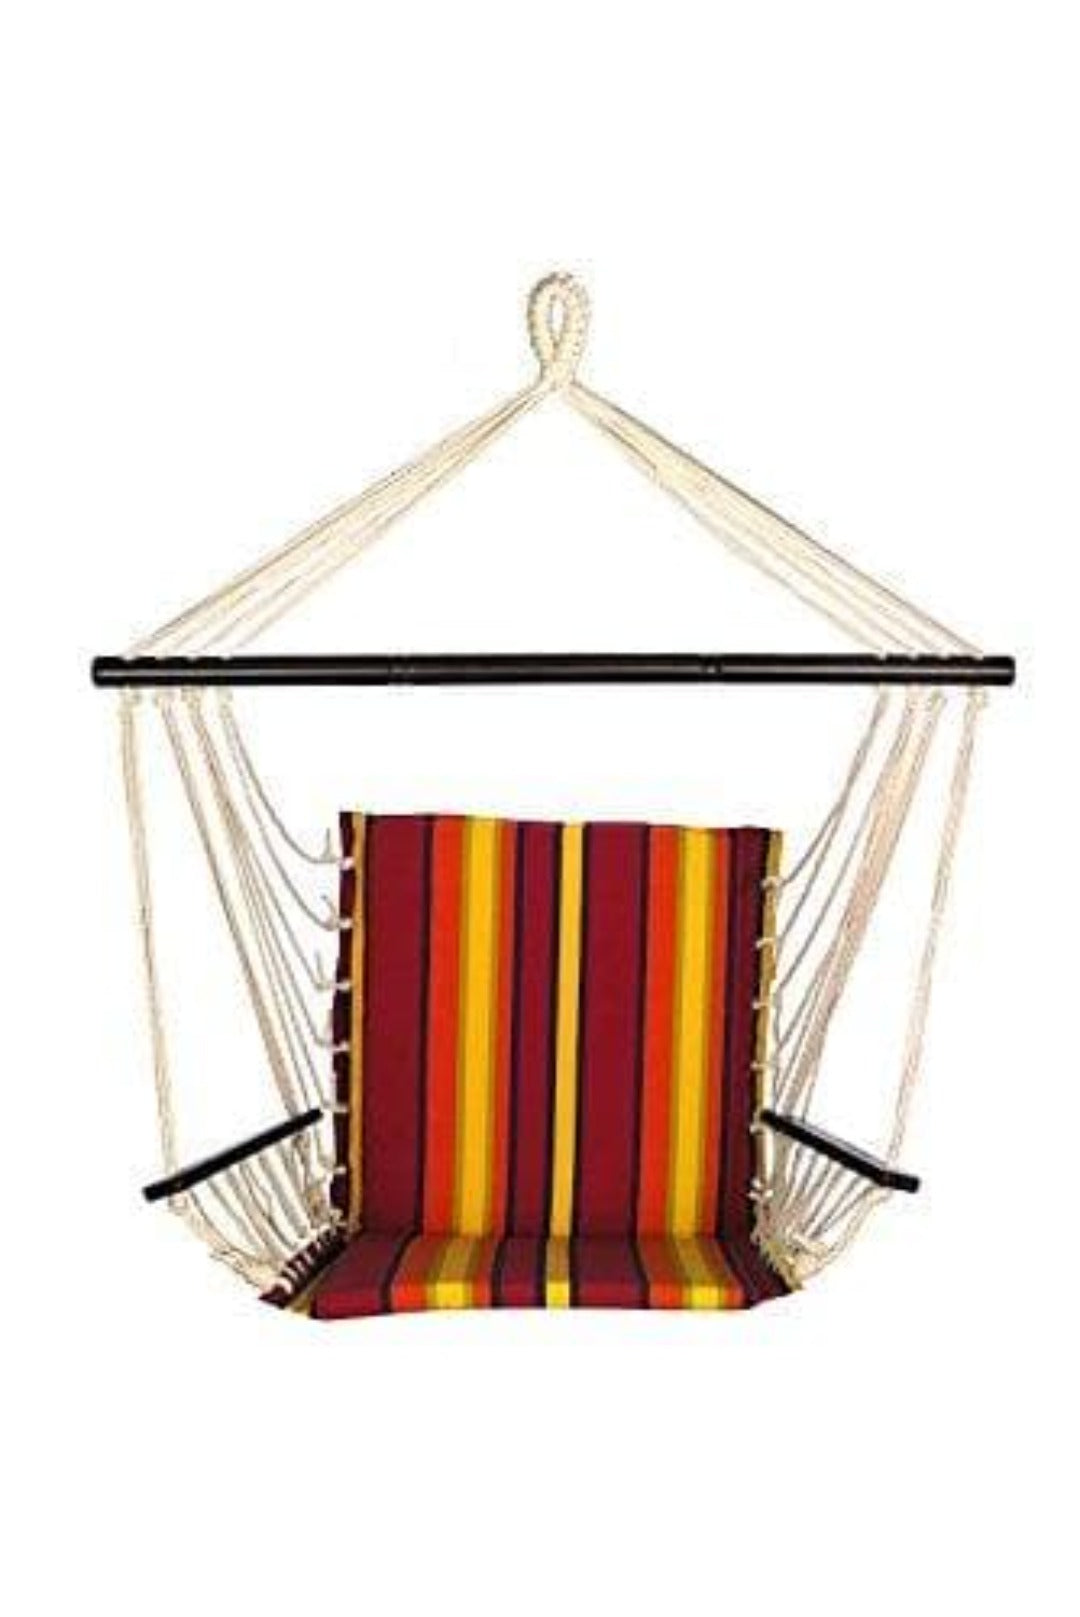 Bliss Metro Series Hammock Hanging Chair with Armrests - Senior.com Hanging Chairs